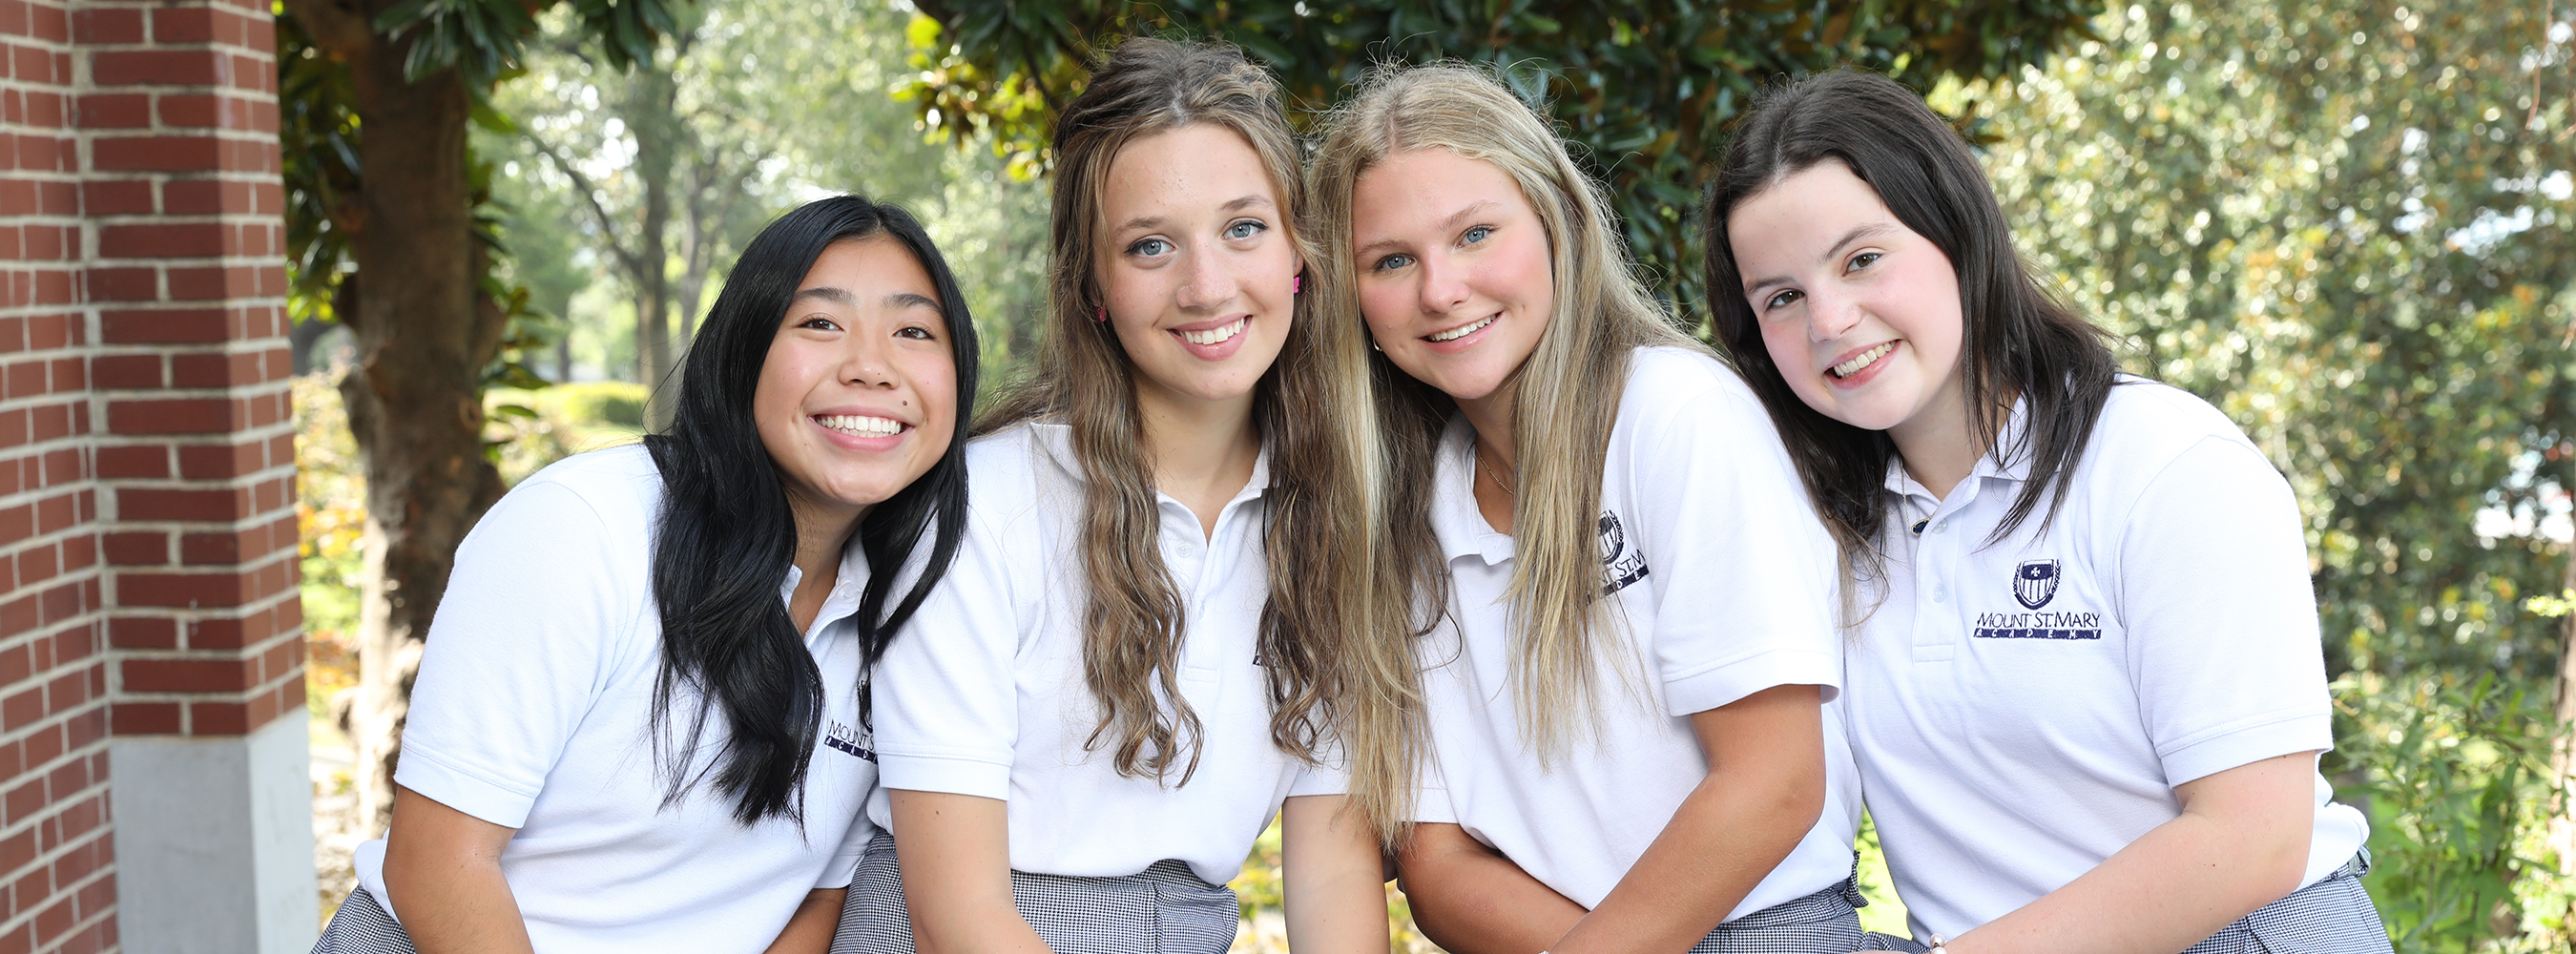 group of four smiling students